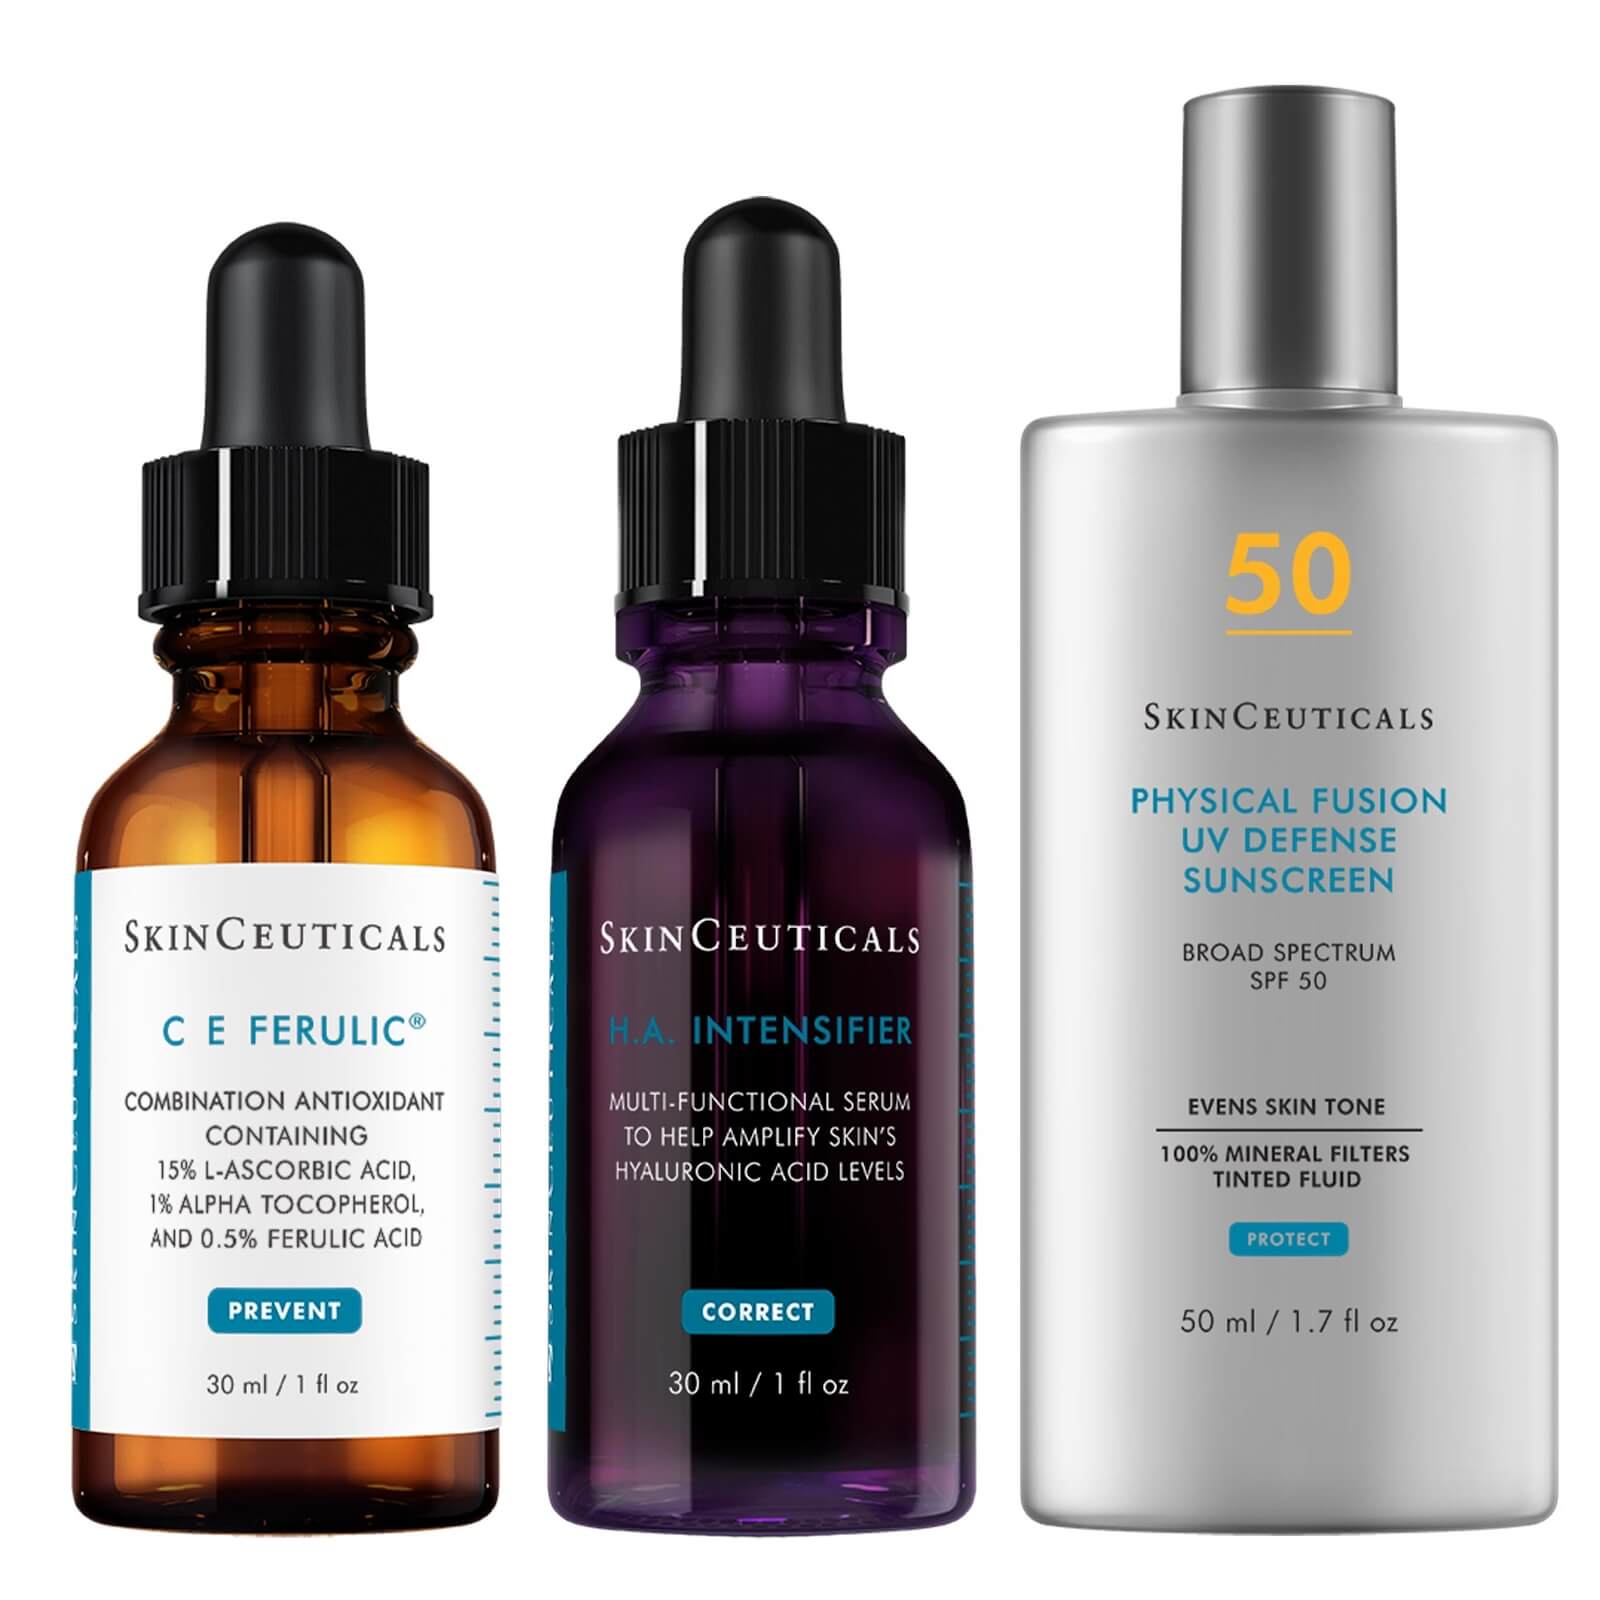 Skinceuticals Anti-ageing Vitamin C And Mineral Sunscreen Kit